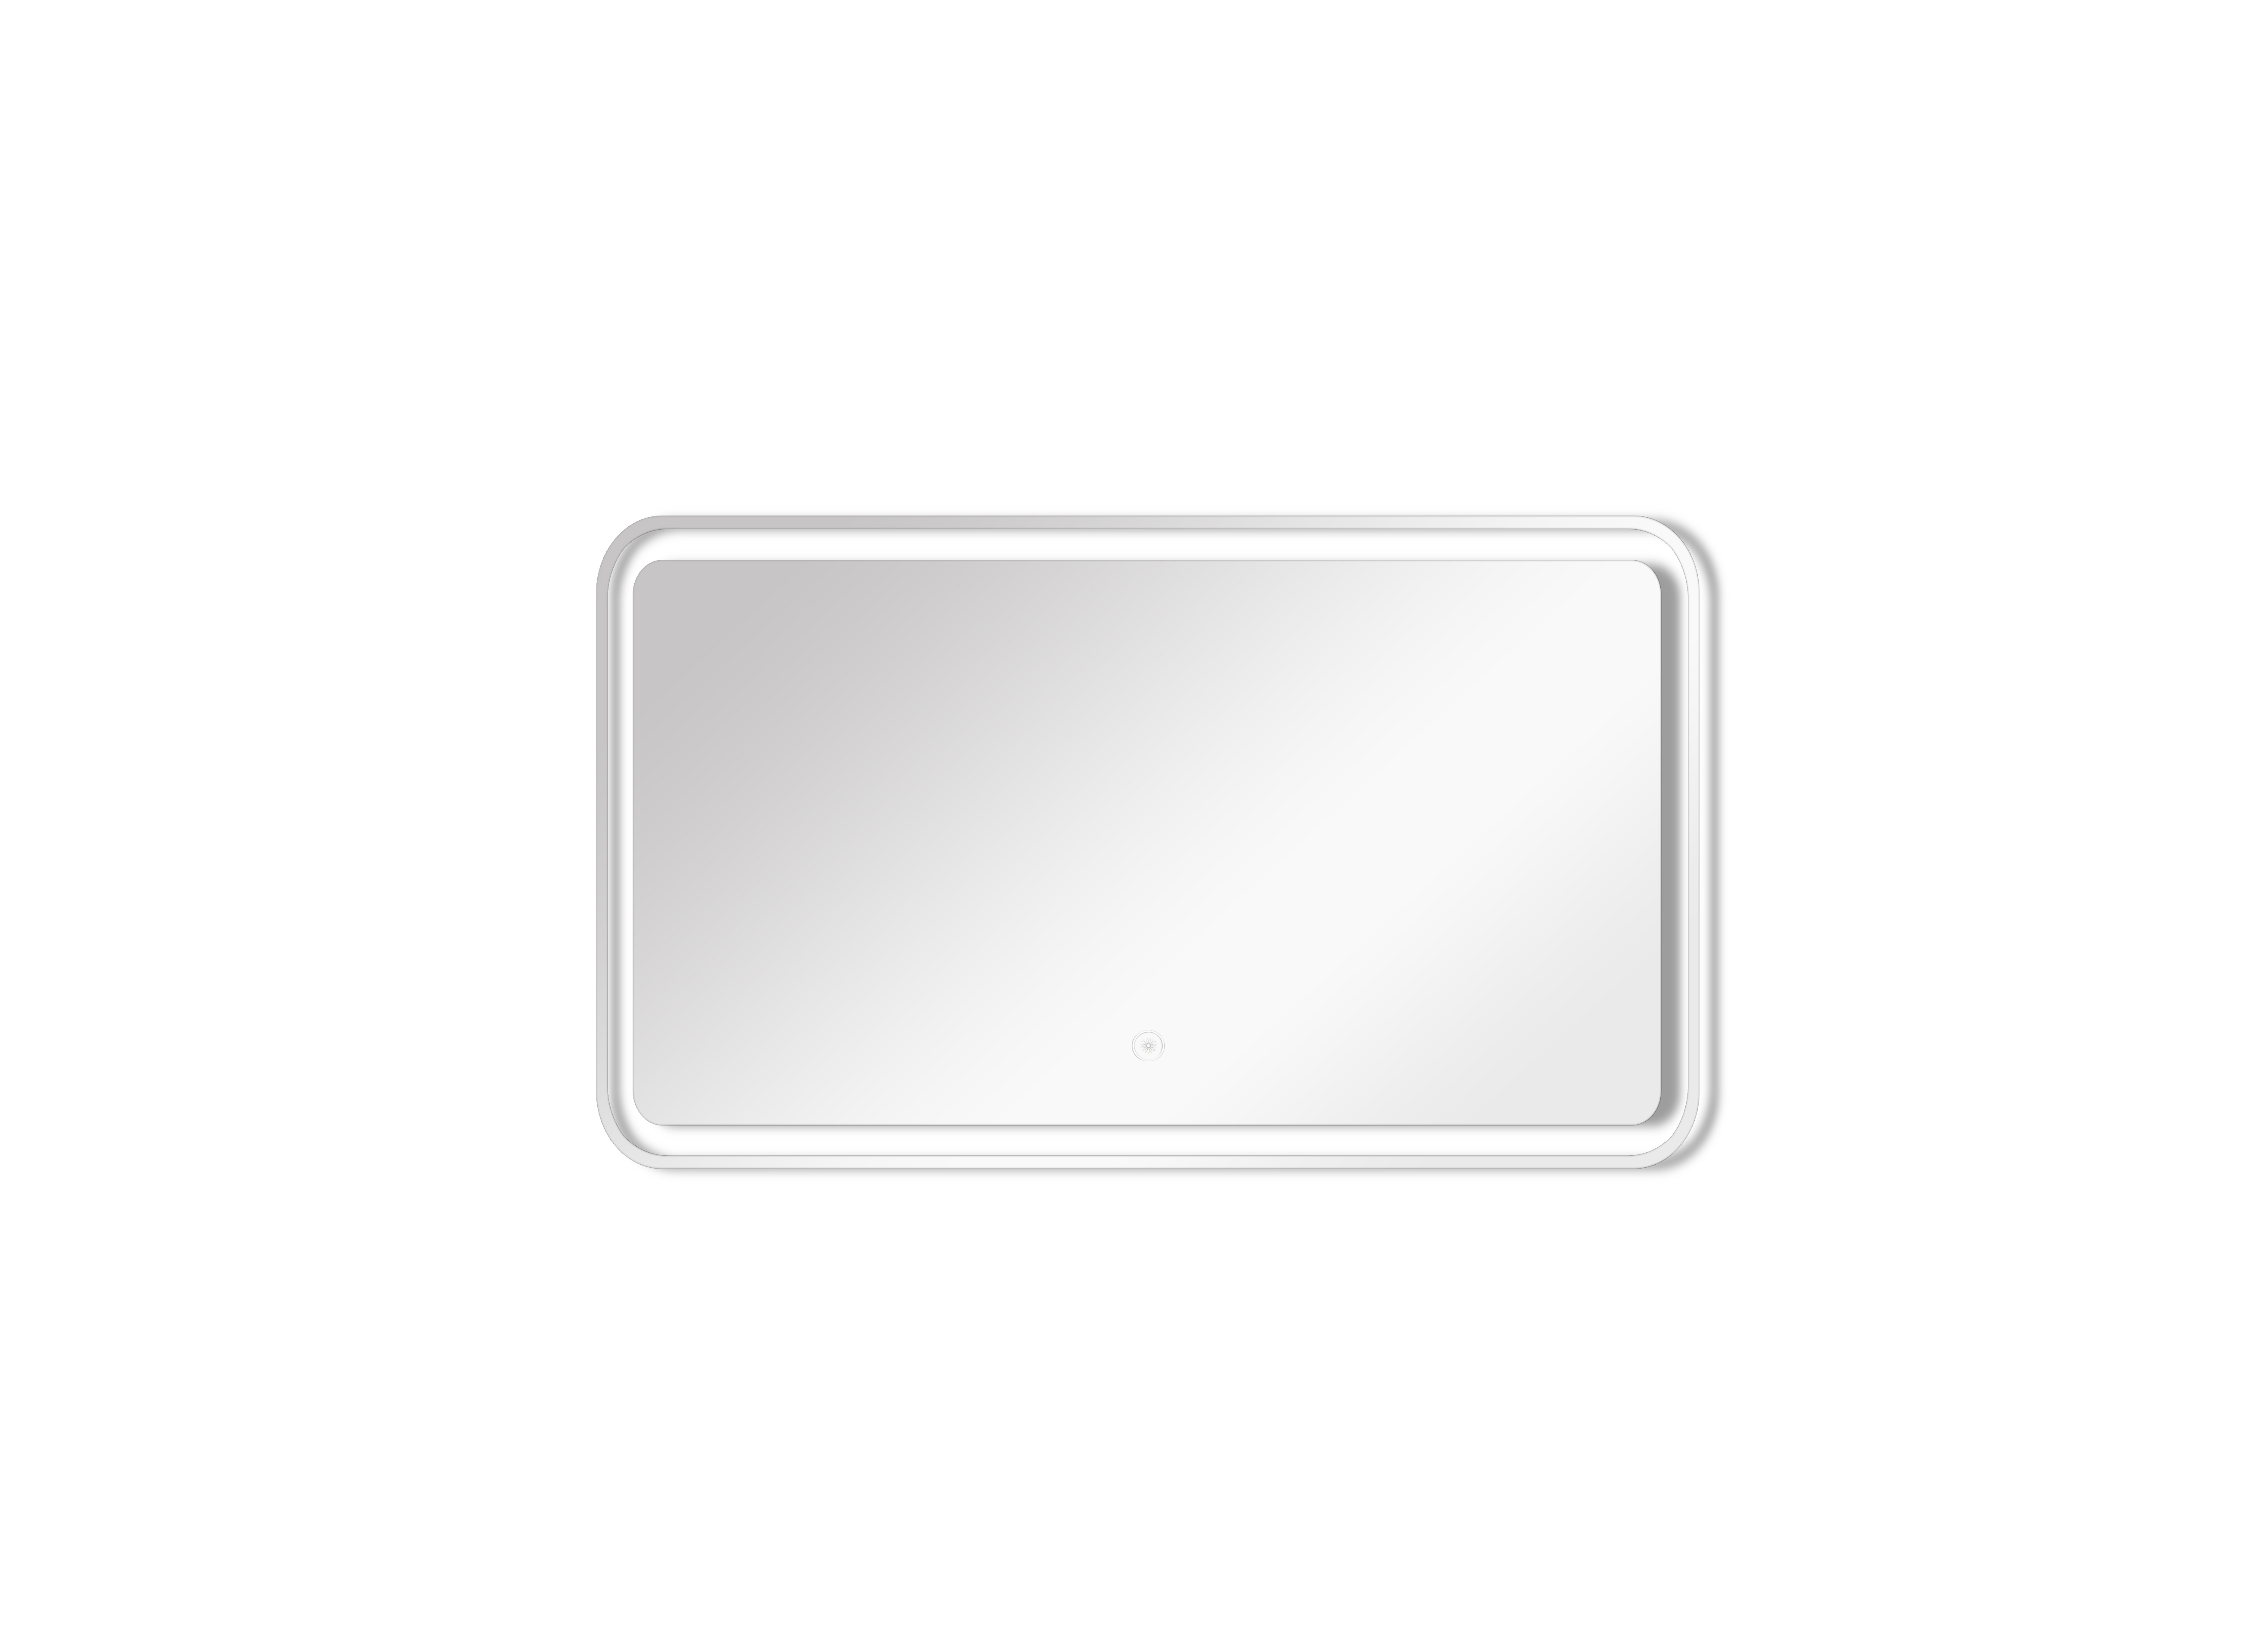 LED-Backlit Contemporary Mirror 29.53x27.56" w/Touch Sensor